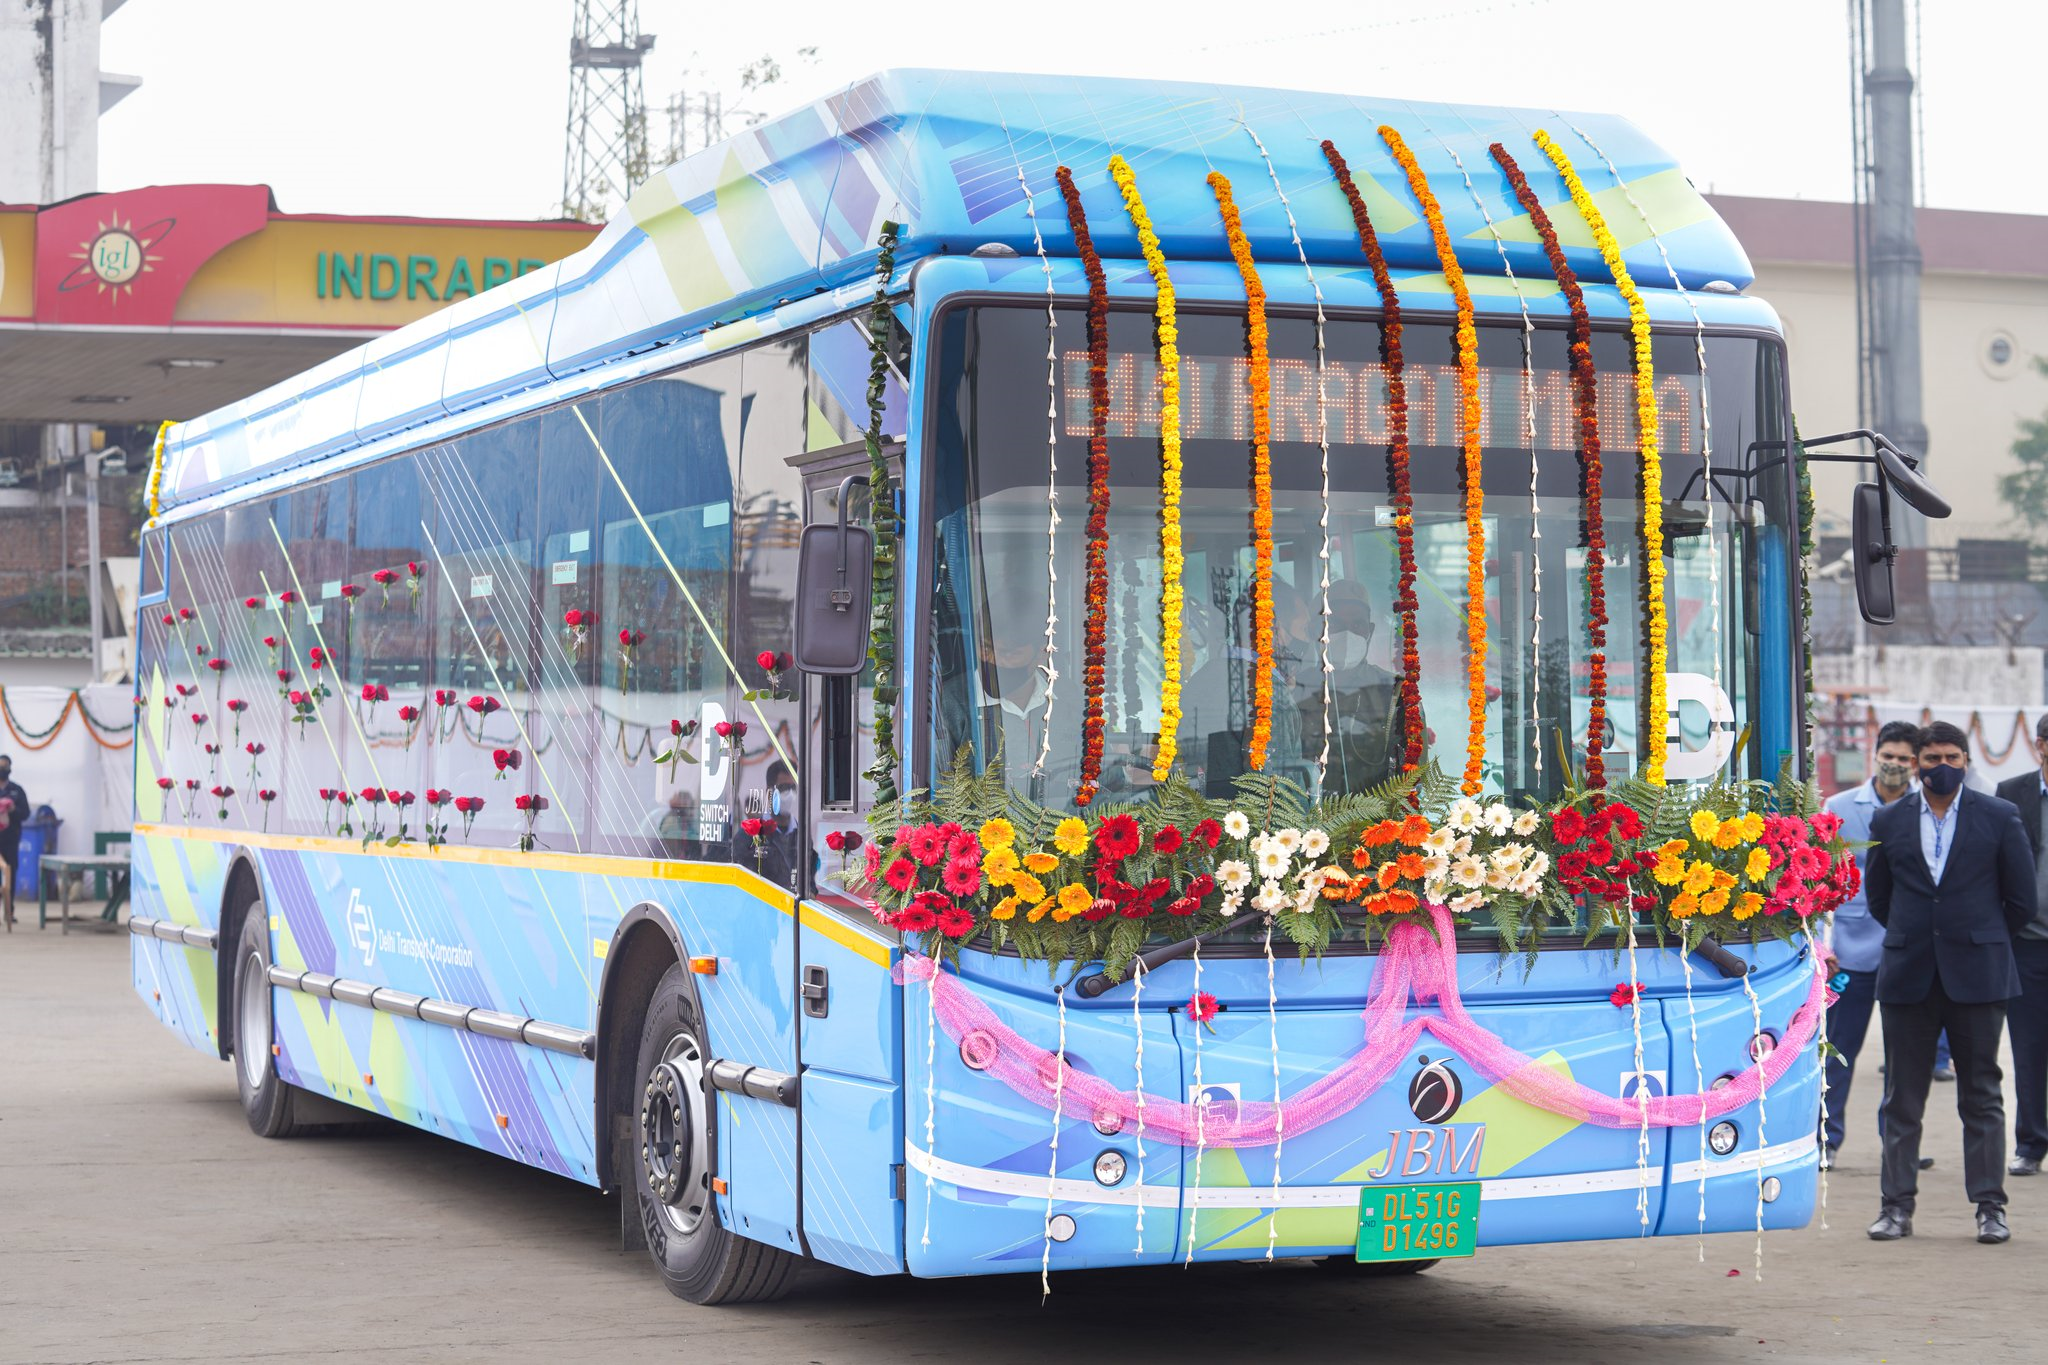 Induction of e-bus in DTC: Remedy or political stunt